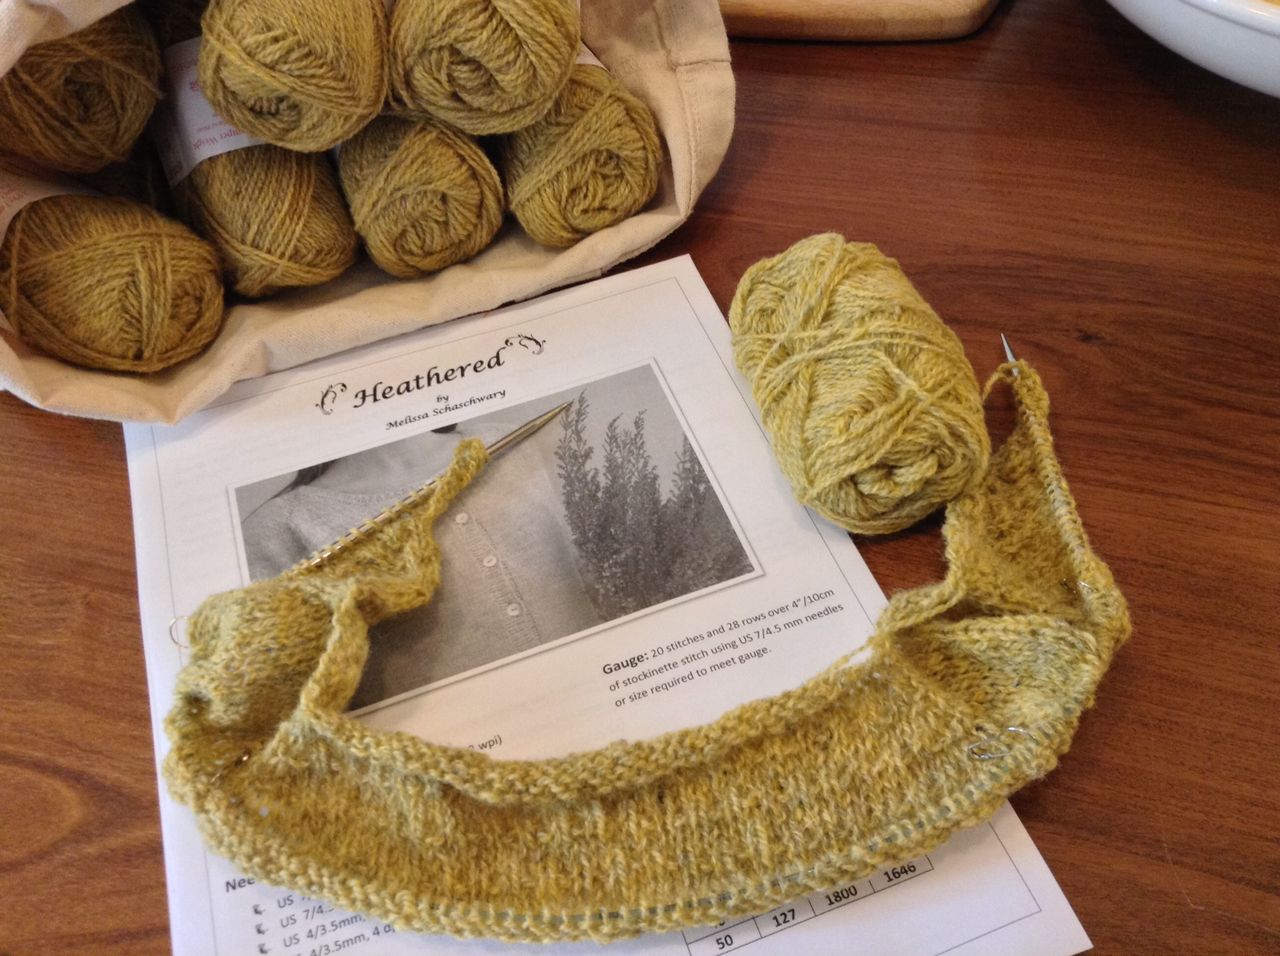 Cast on for yoke of Heathered by Melissa Schaschwary